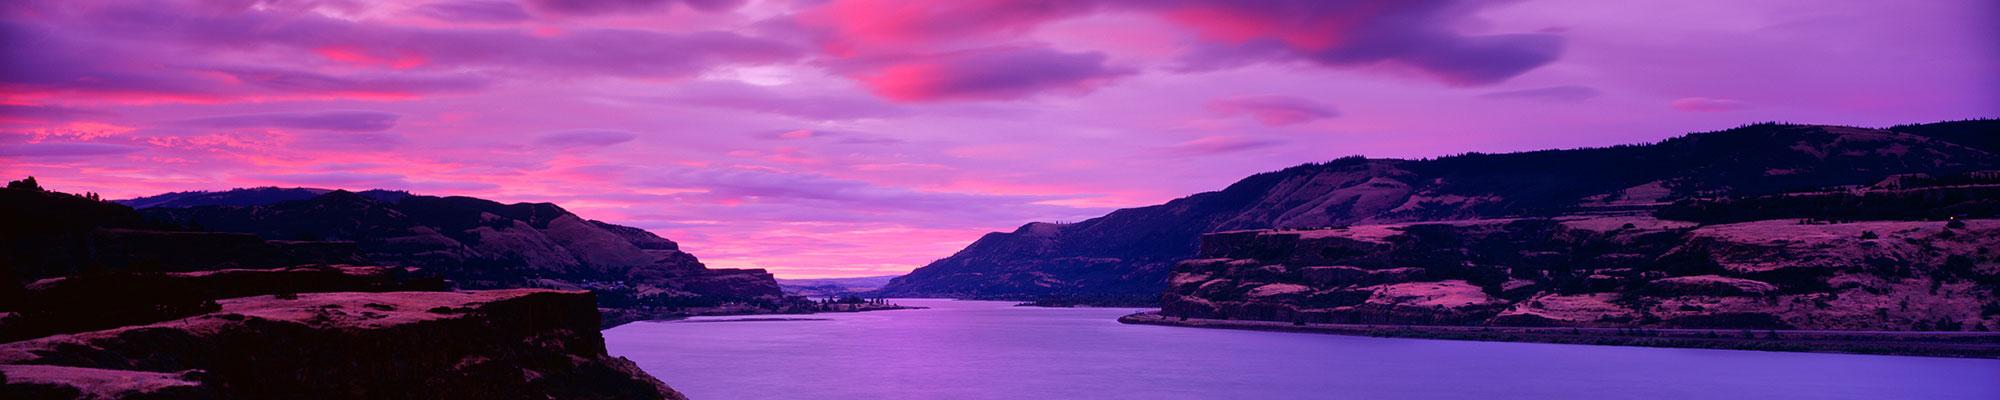 Columbia River Gorge at Sunset